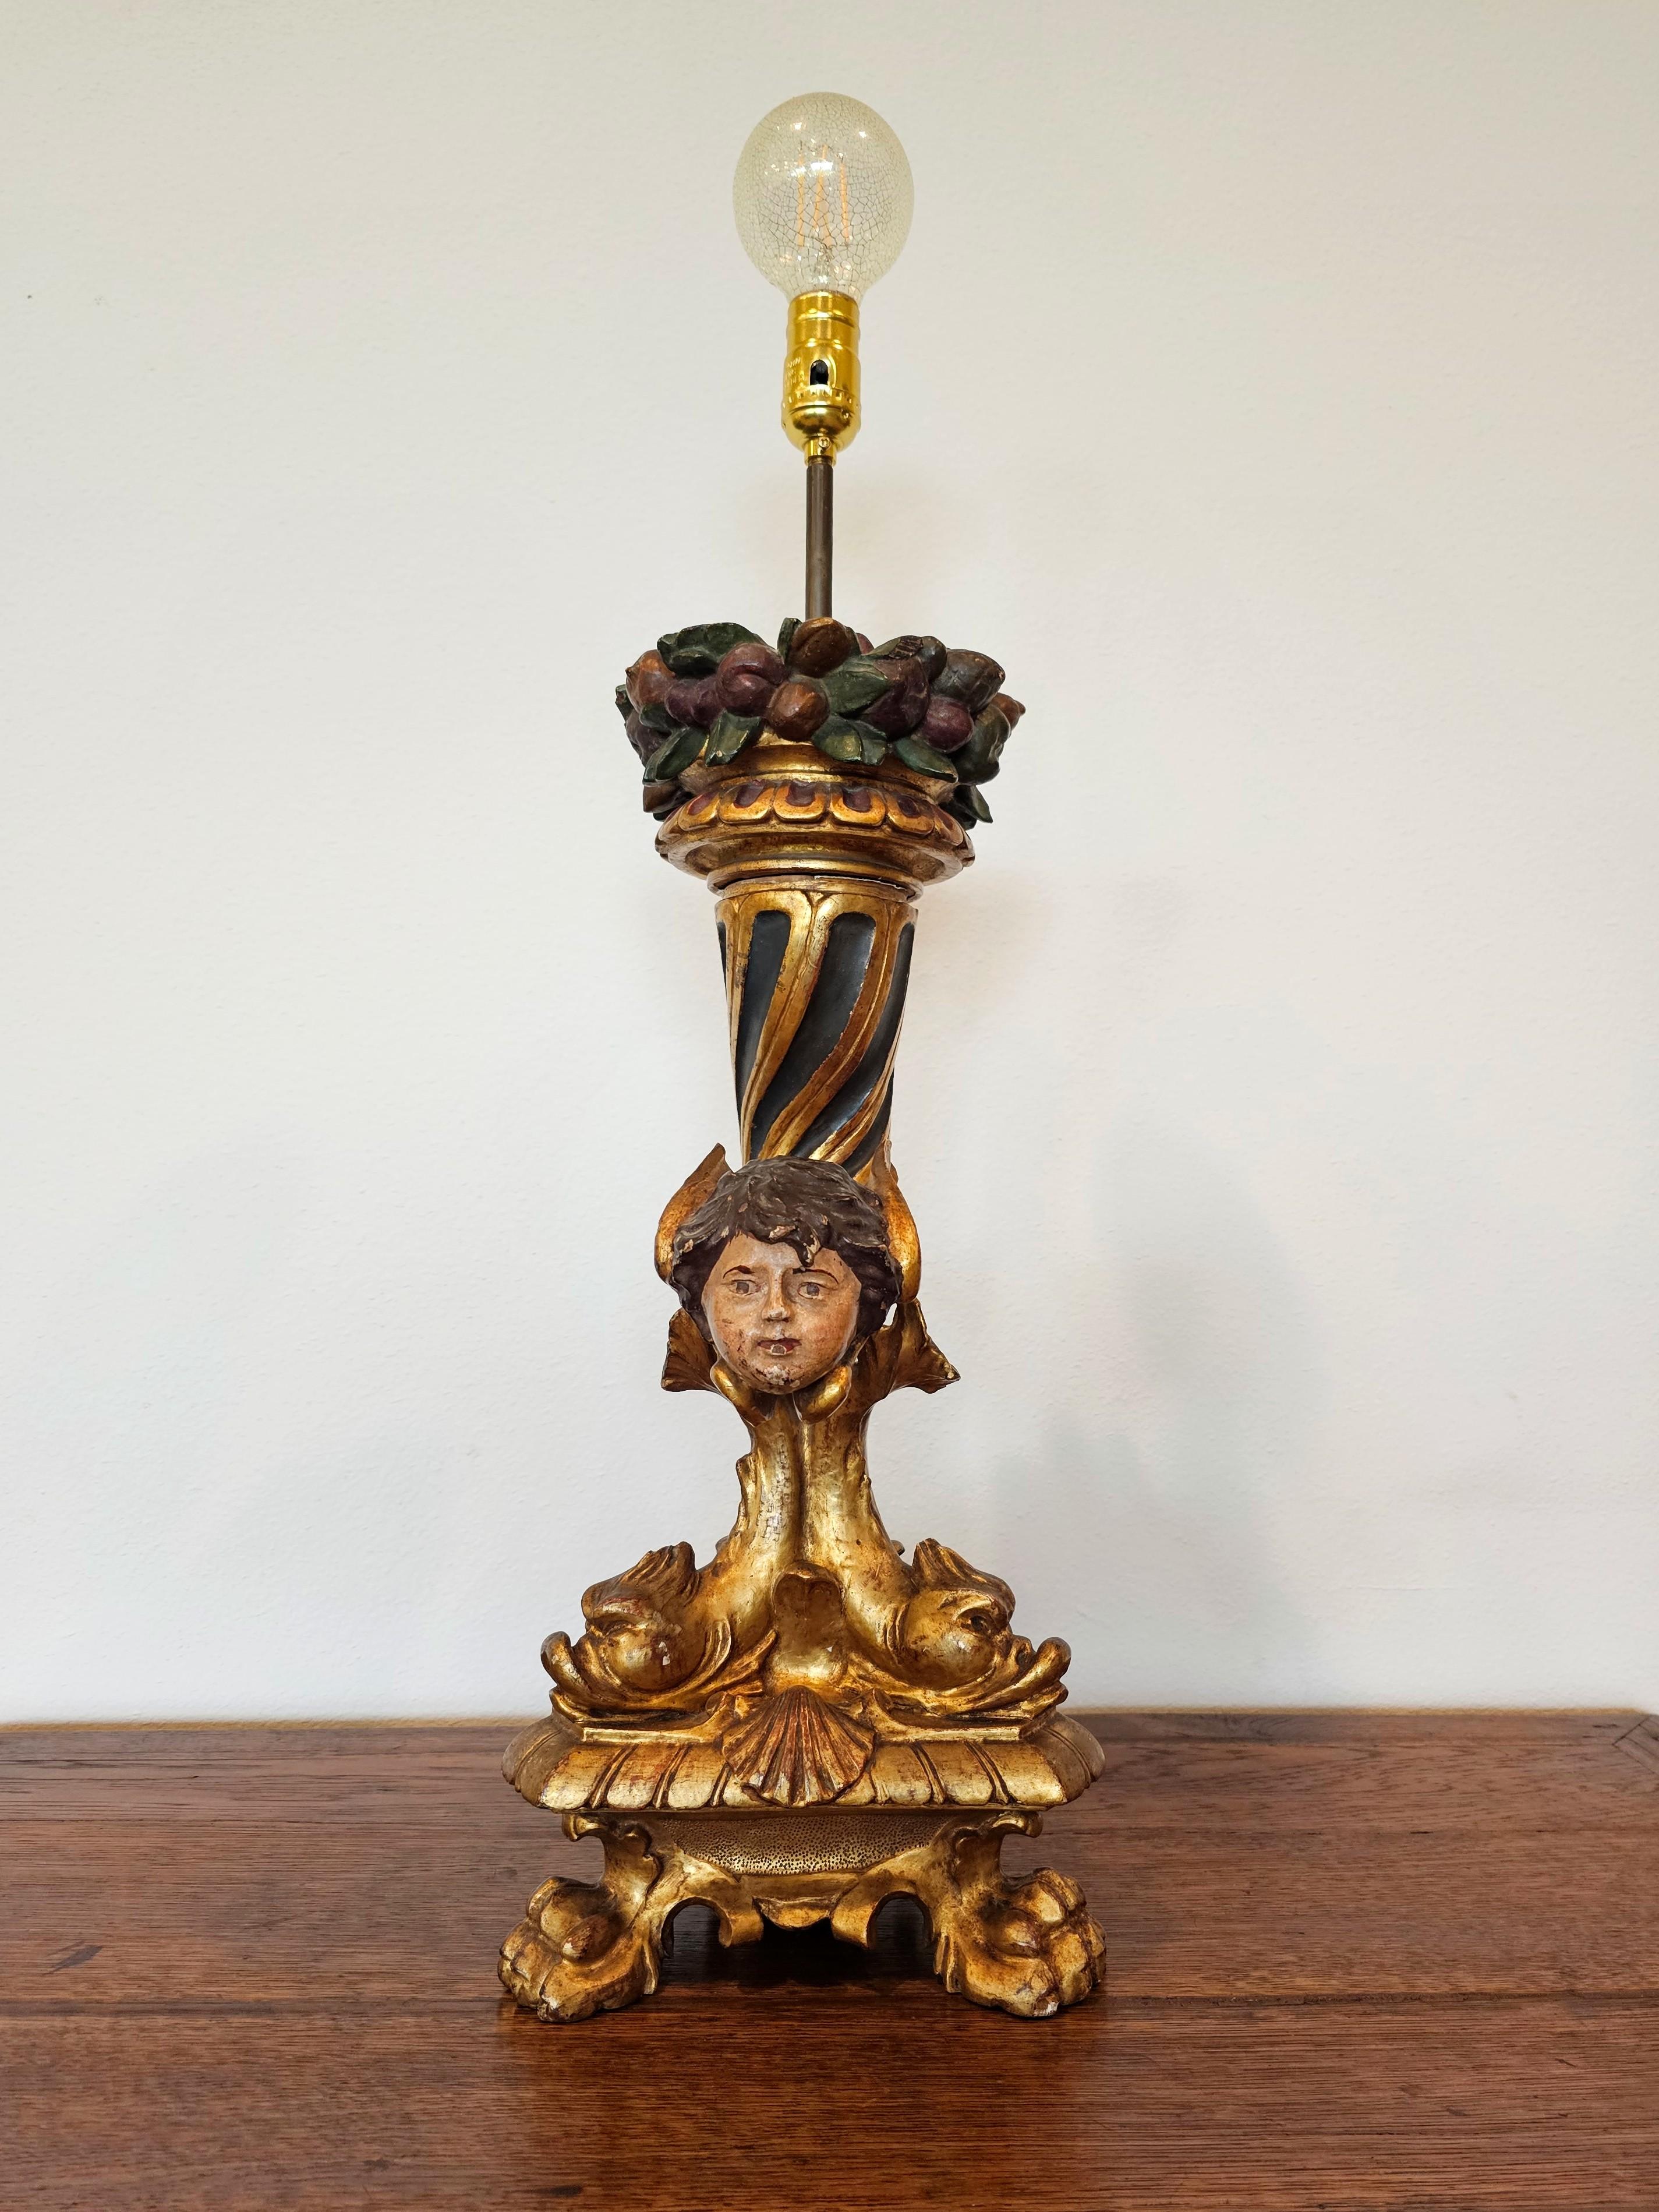 A fabulous French Empire period giltwood figural candlestick, early 19th century, now professionally electrified and fashioned as a single-light table lamp.

Exquisitely hand carved, sculpted, gessoed and polychromed gilded wood, exceptionally